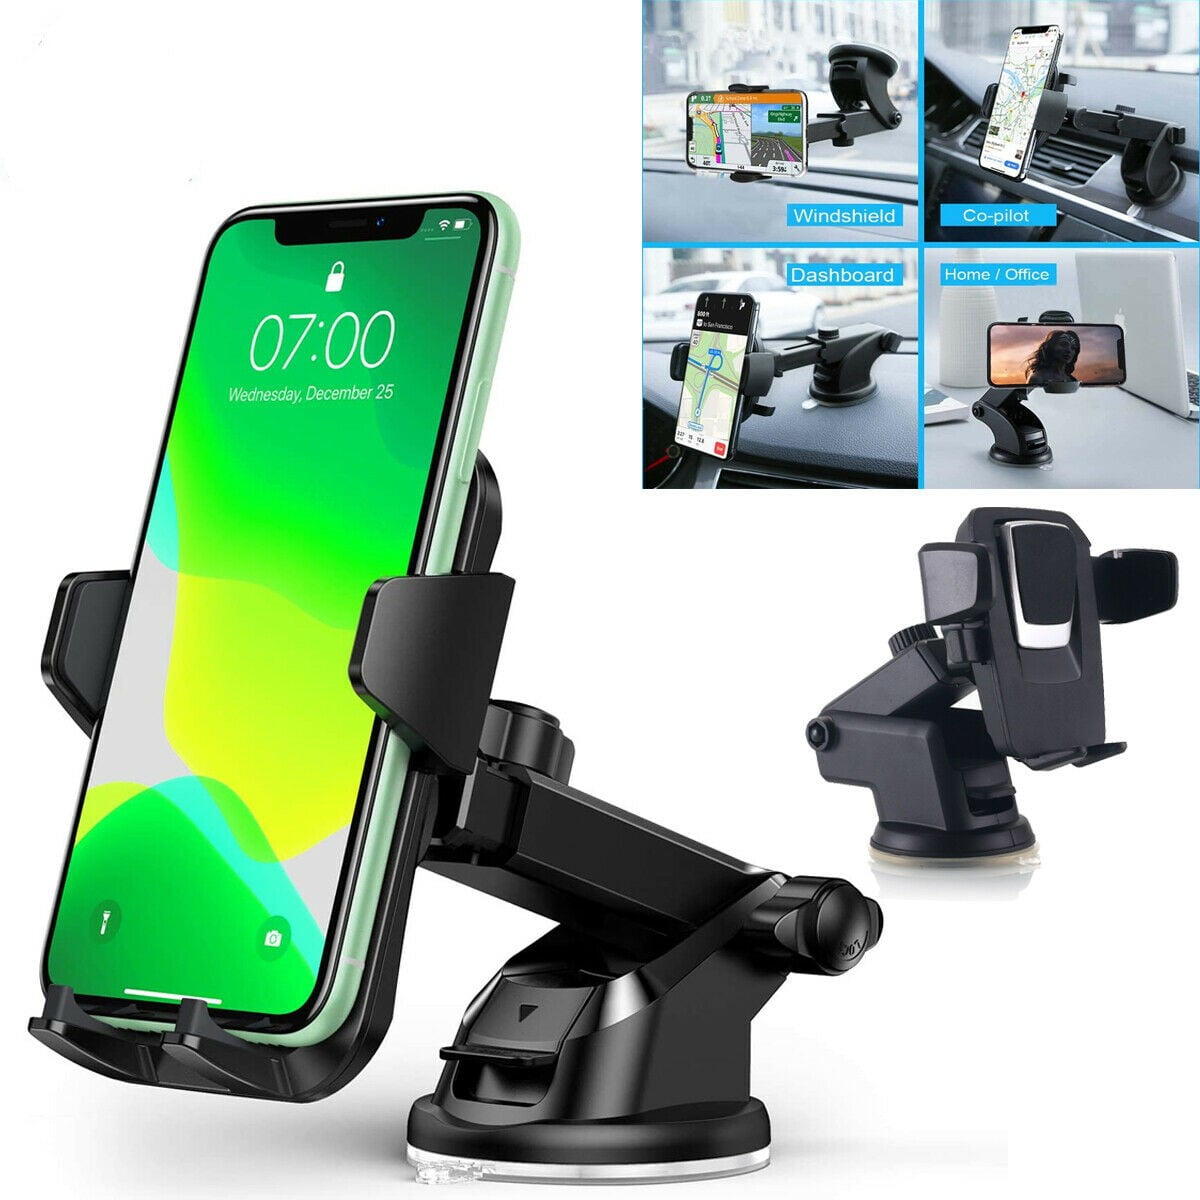 Double Locking Suction Cup Phone Holder for Car Dashboard Air Vent Windshield Cell Phone Car Mount Fit for iPhone 12 11 Pro SE XR XS Max 8 Plus Samsung S20 S21 Andobil Car Phone Mount Easy Clamp,